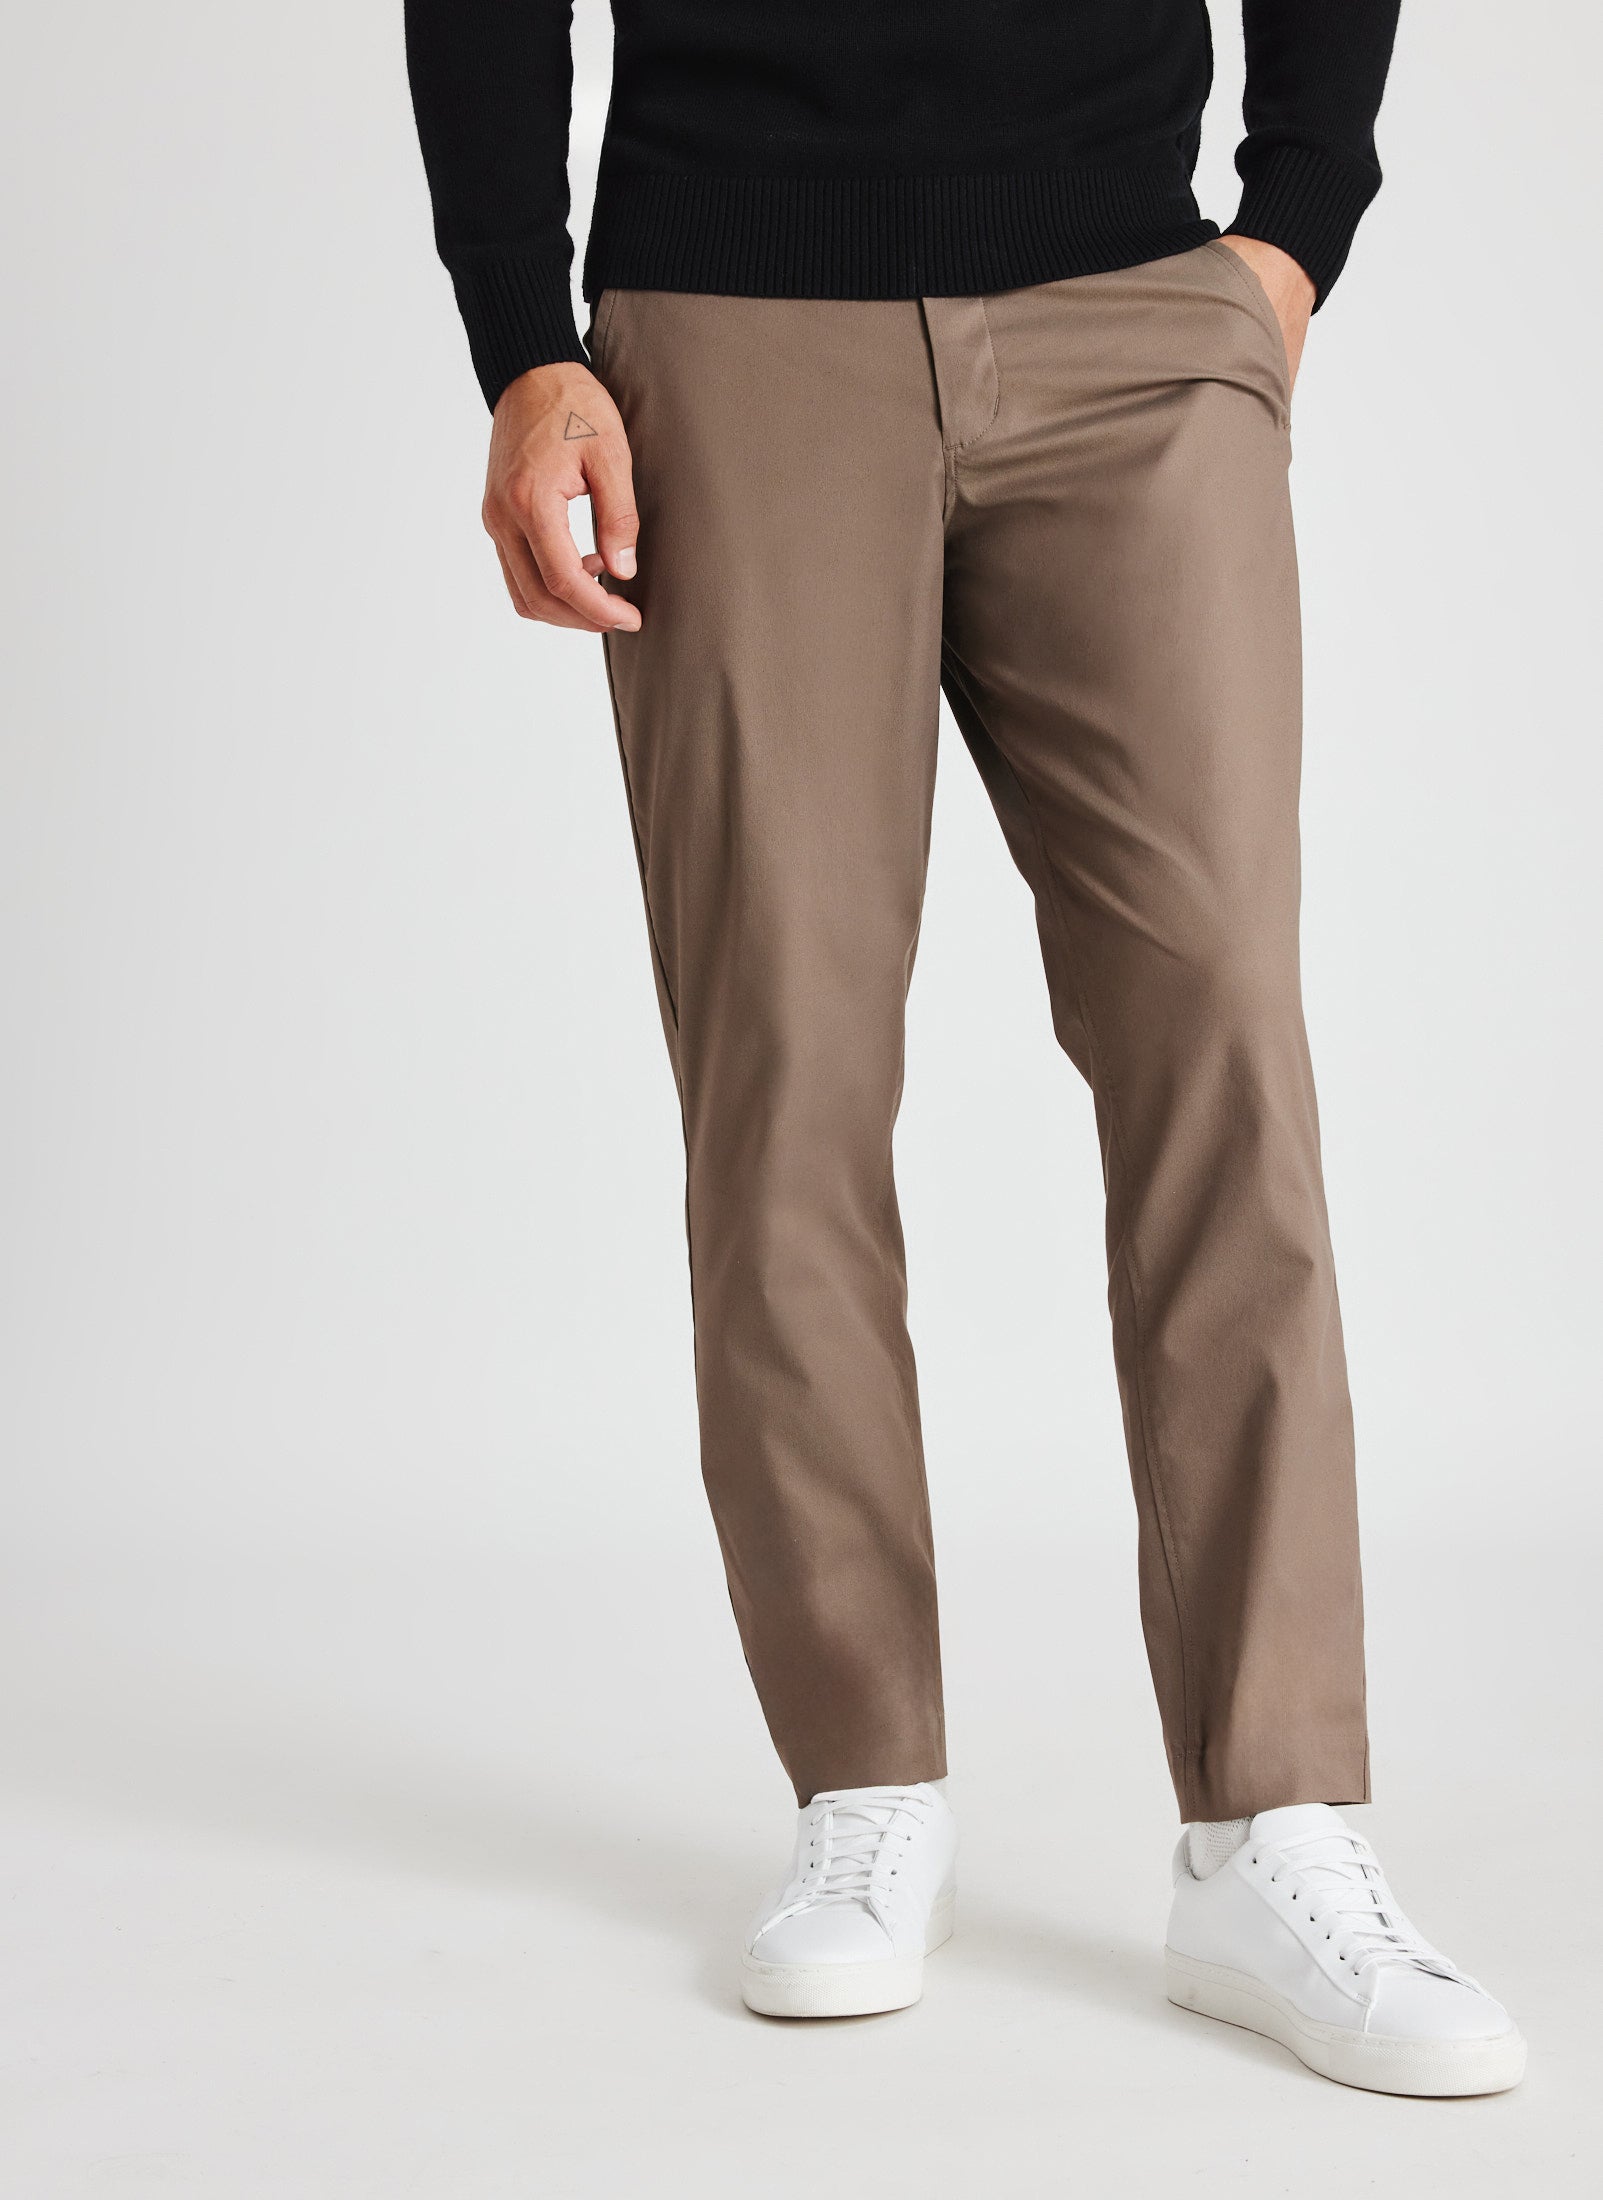 ABC Slim-Fit Trouser 34L *Smooth Twill, Men's Trousers